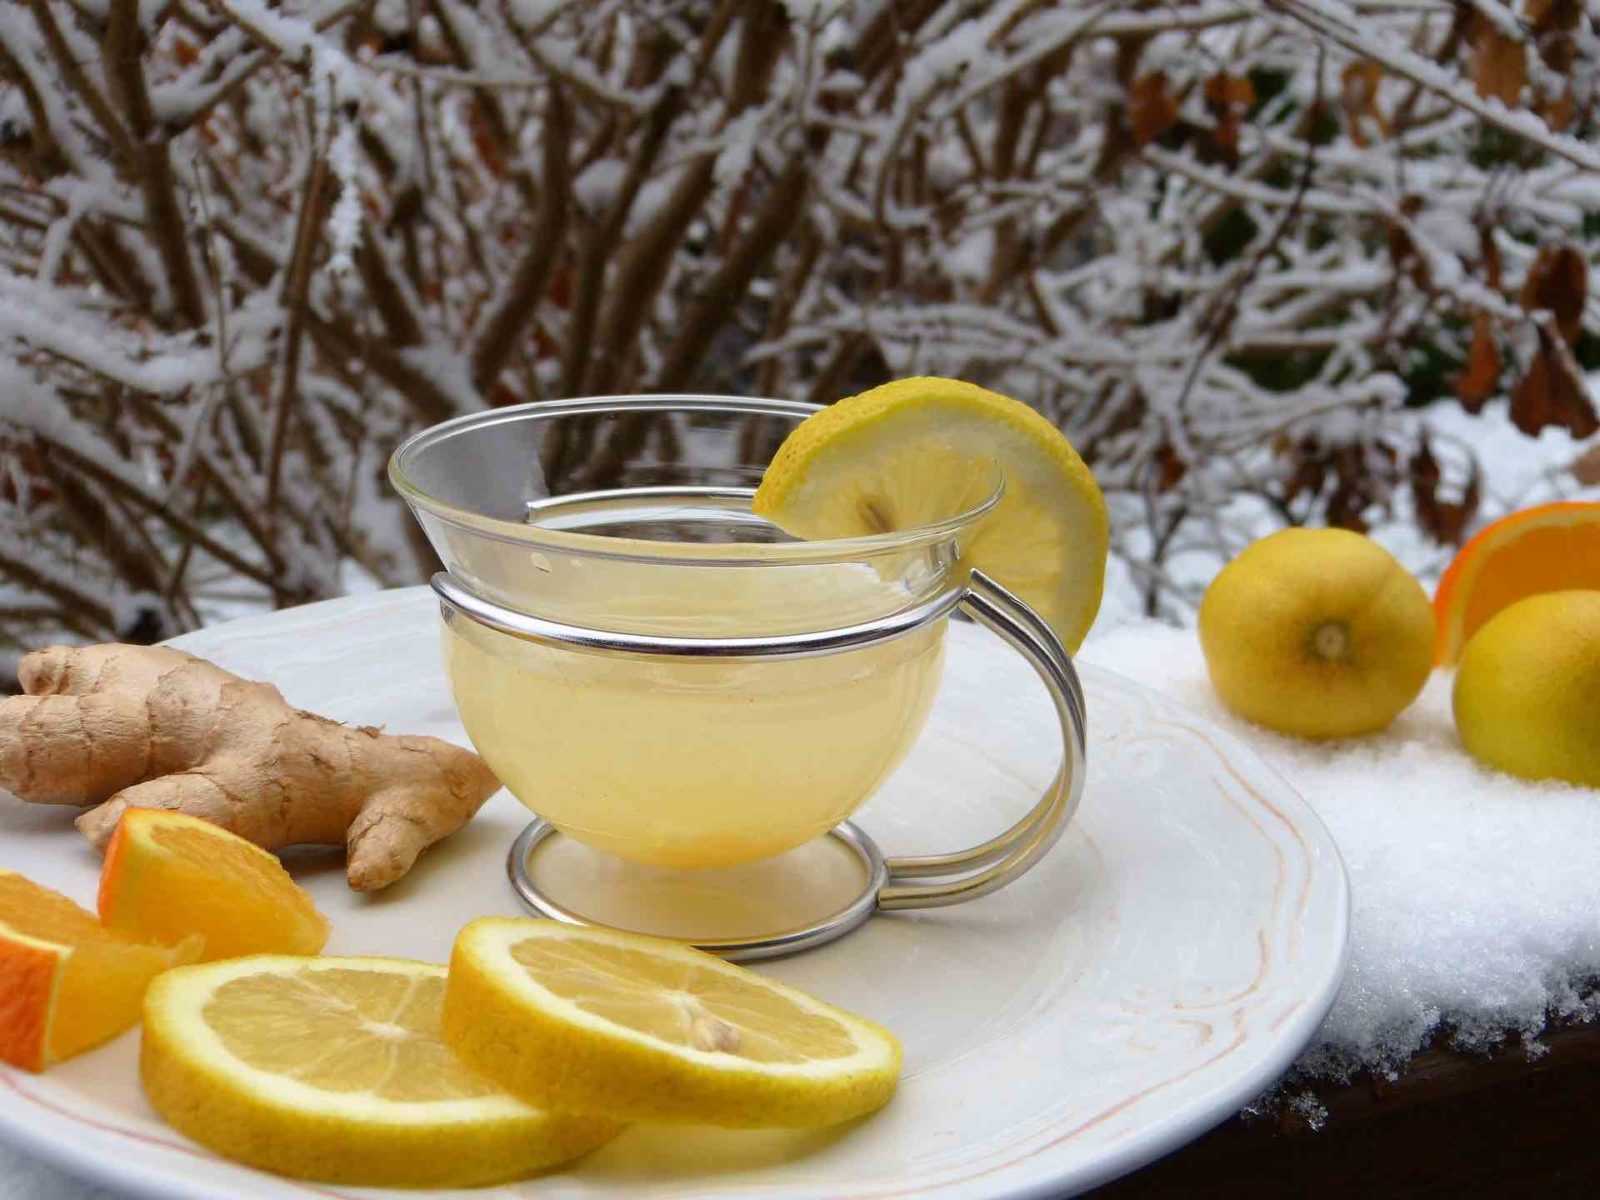 Picture of lemon and ginger tea in a winter setting